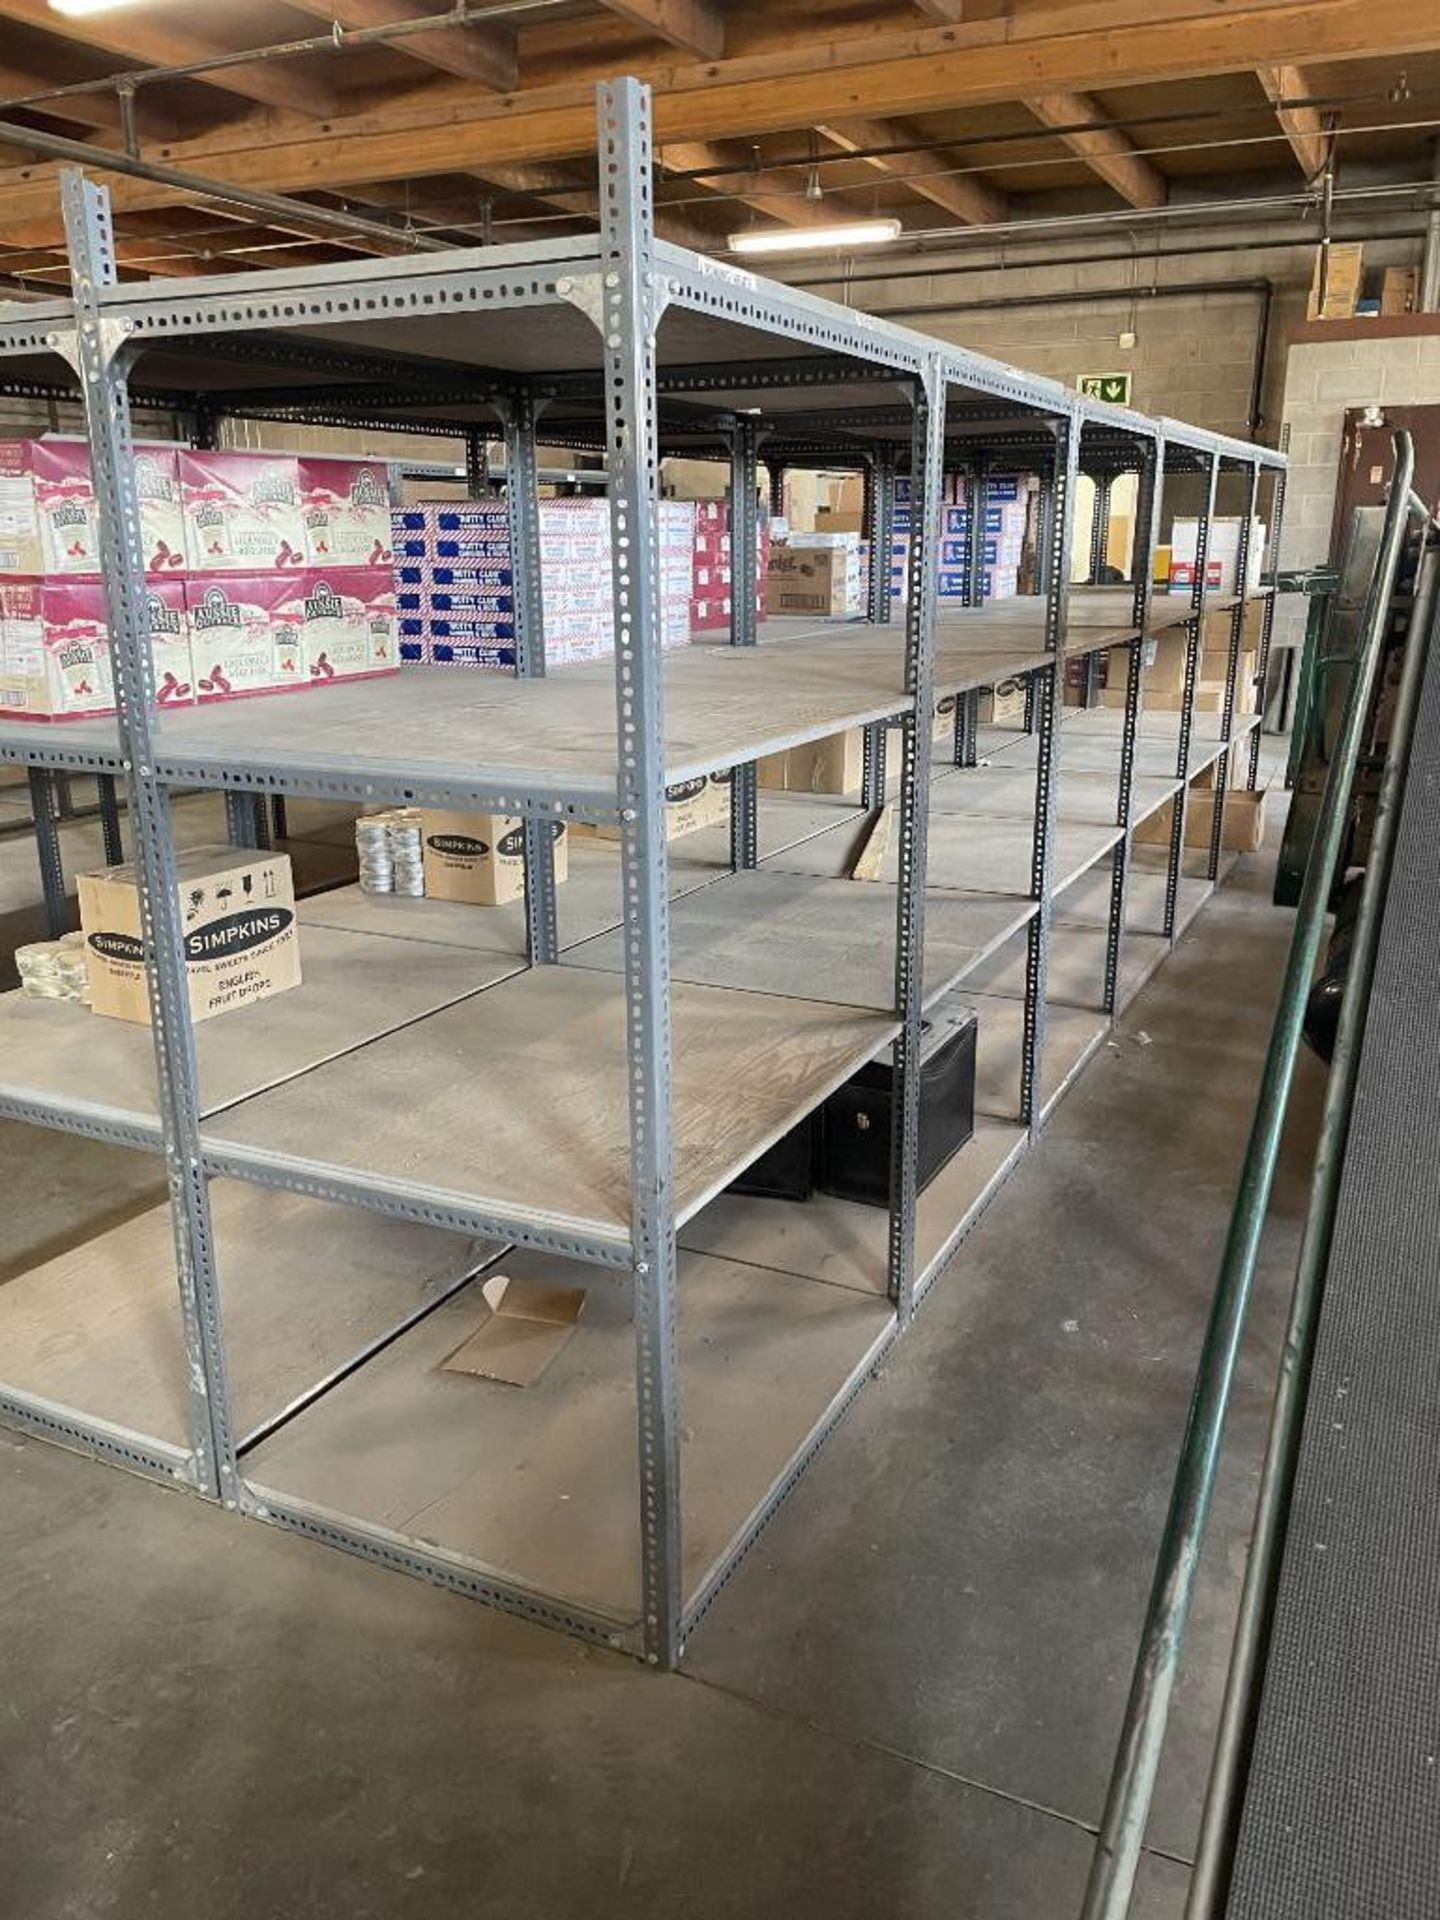 (6) SECTIONS OF ADJUSTABLE WAREHOUSE SHELVING